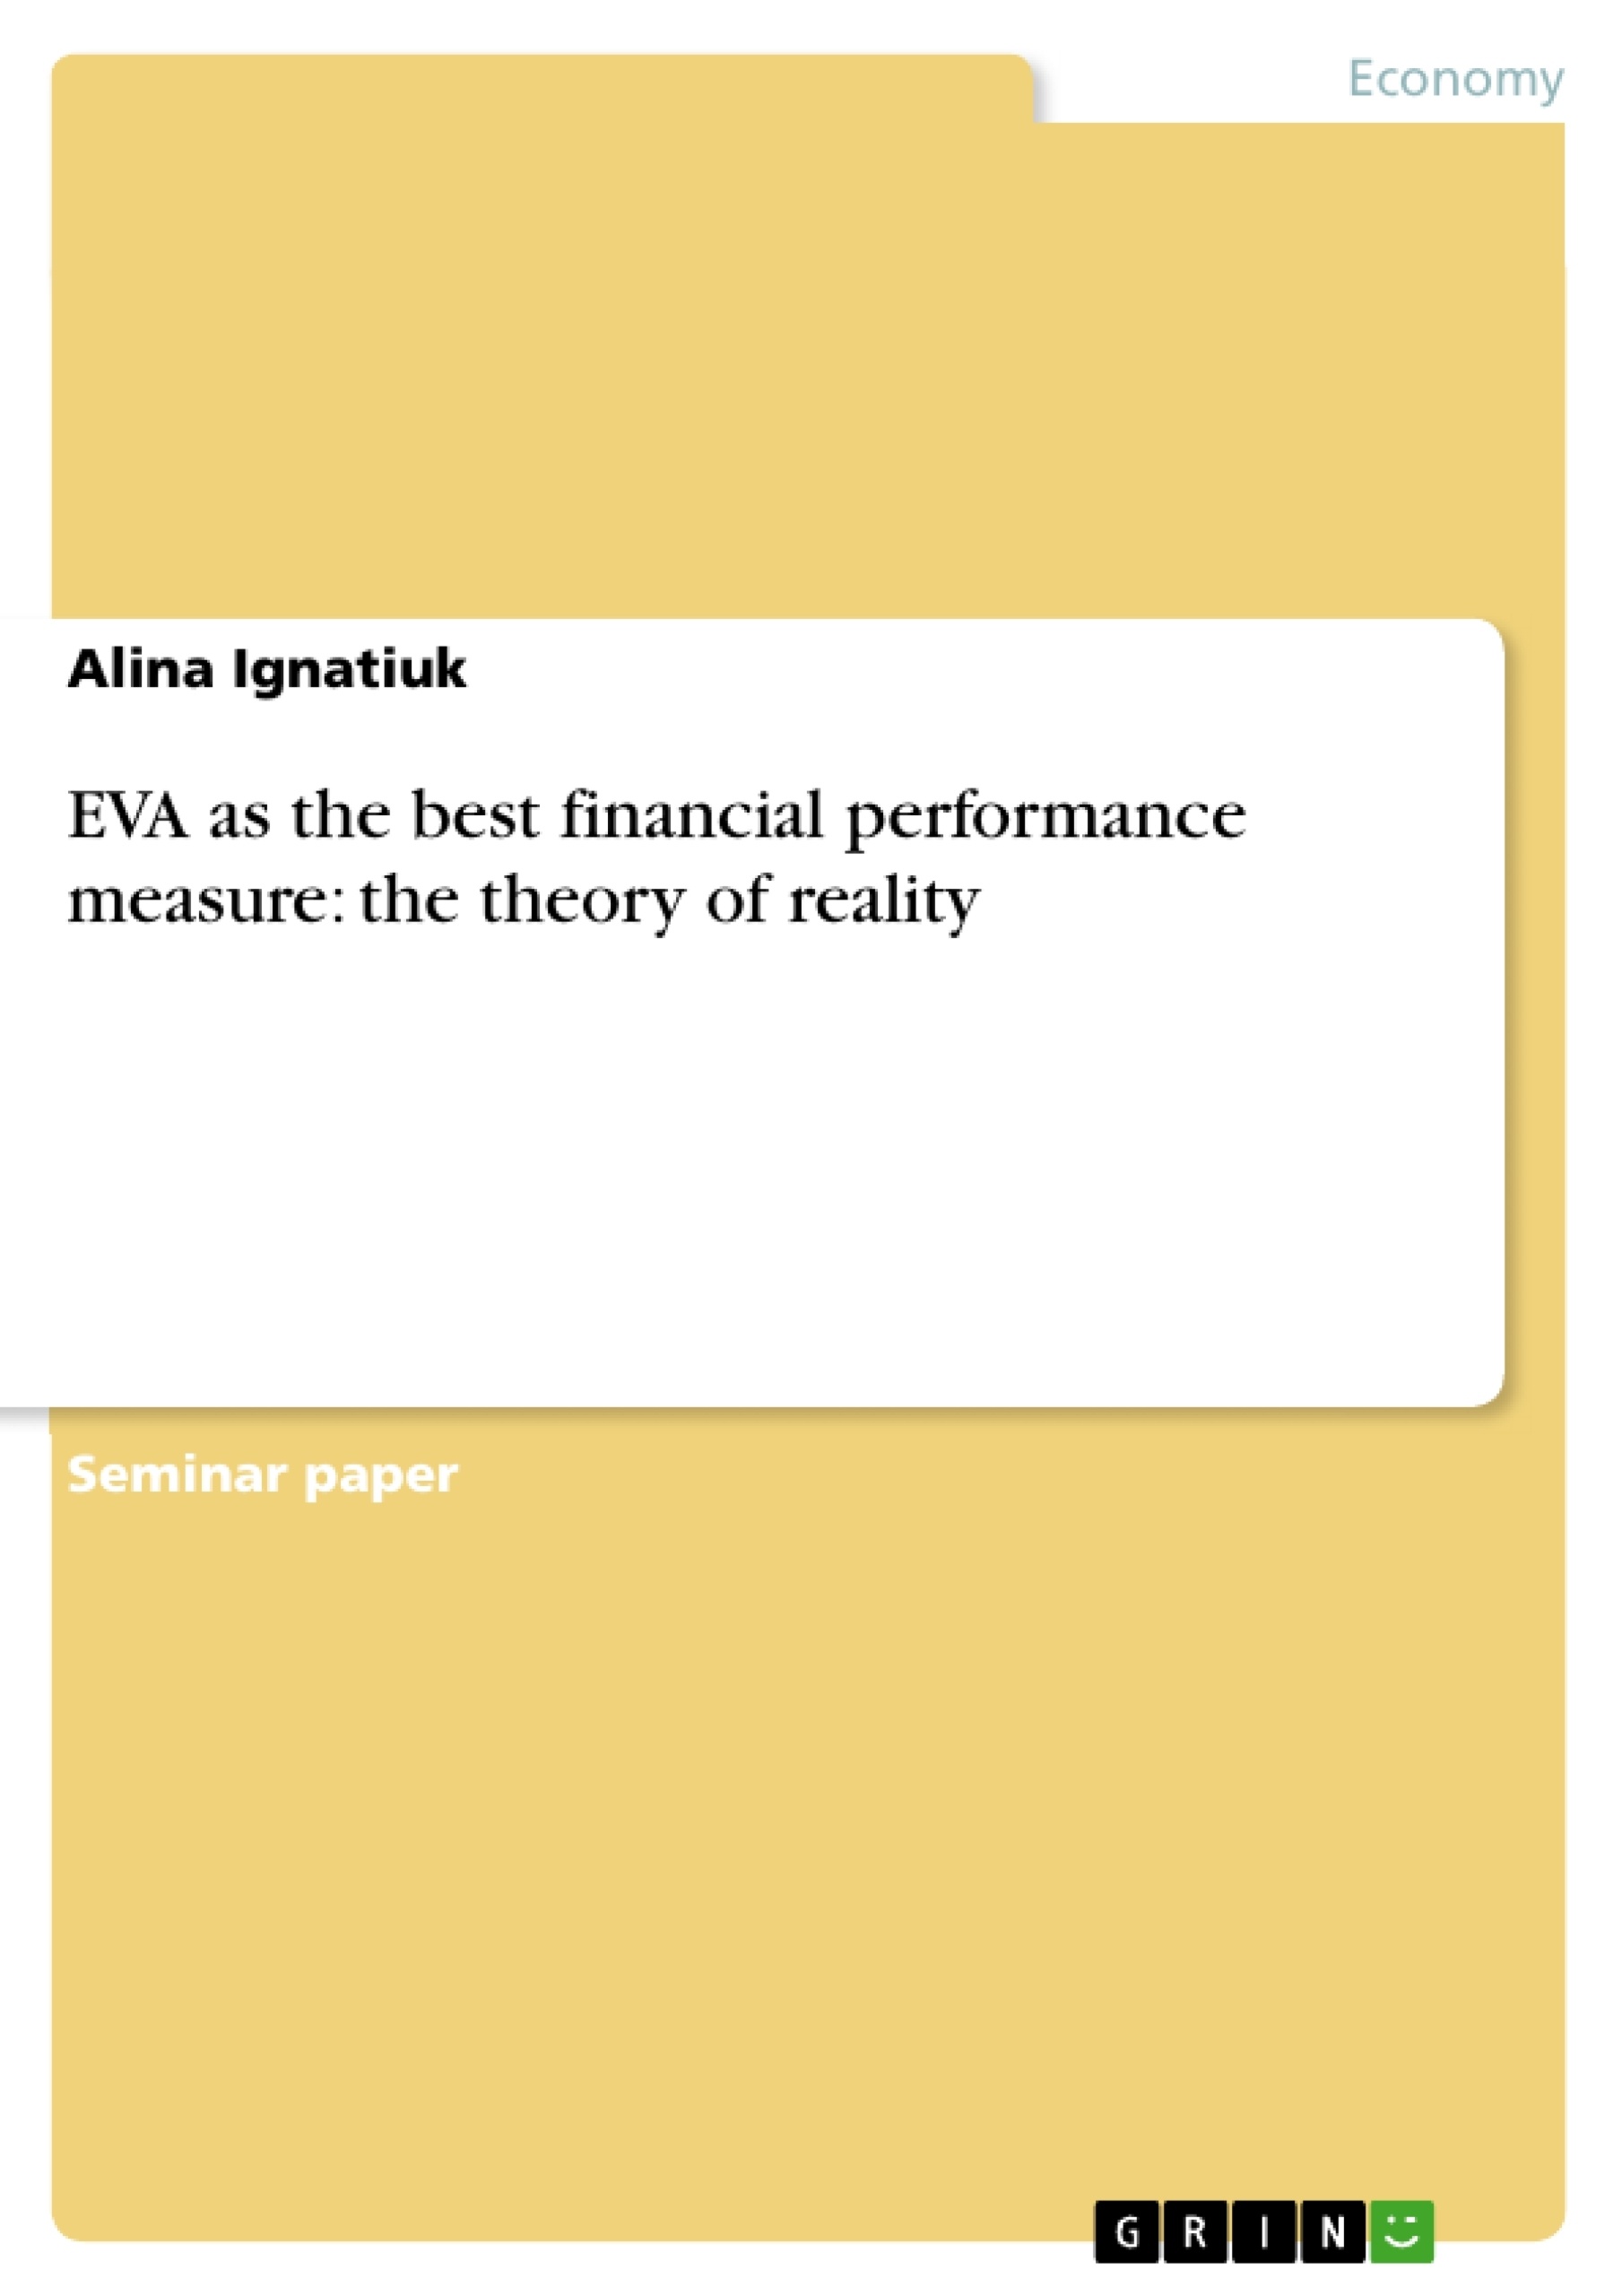 Title: EVA as the best financial performance measure: the theory of reality